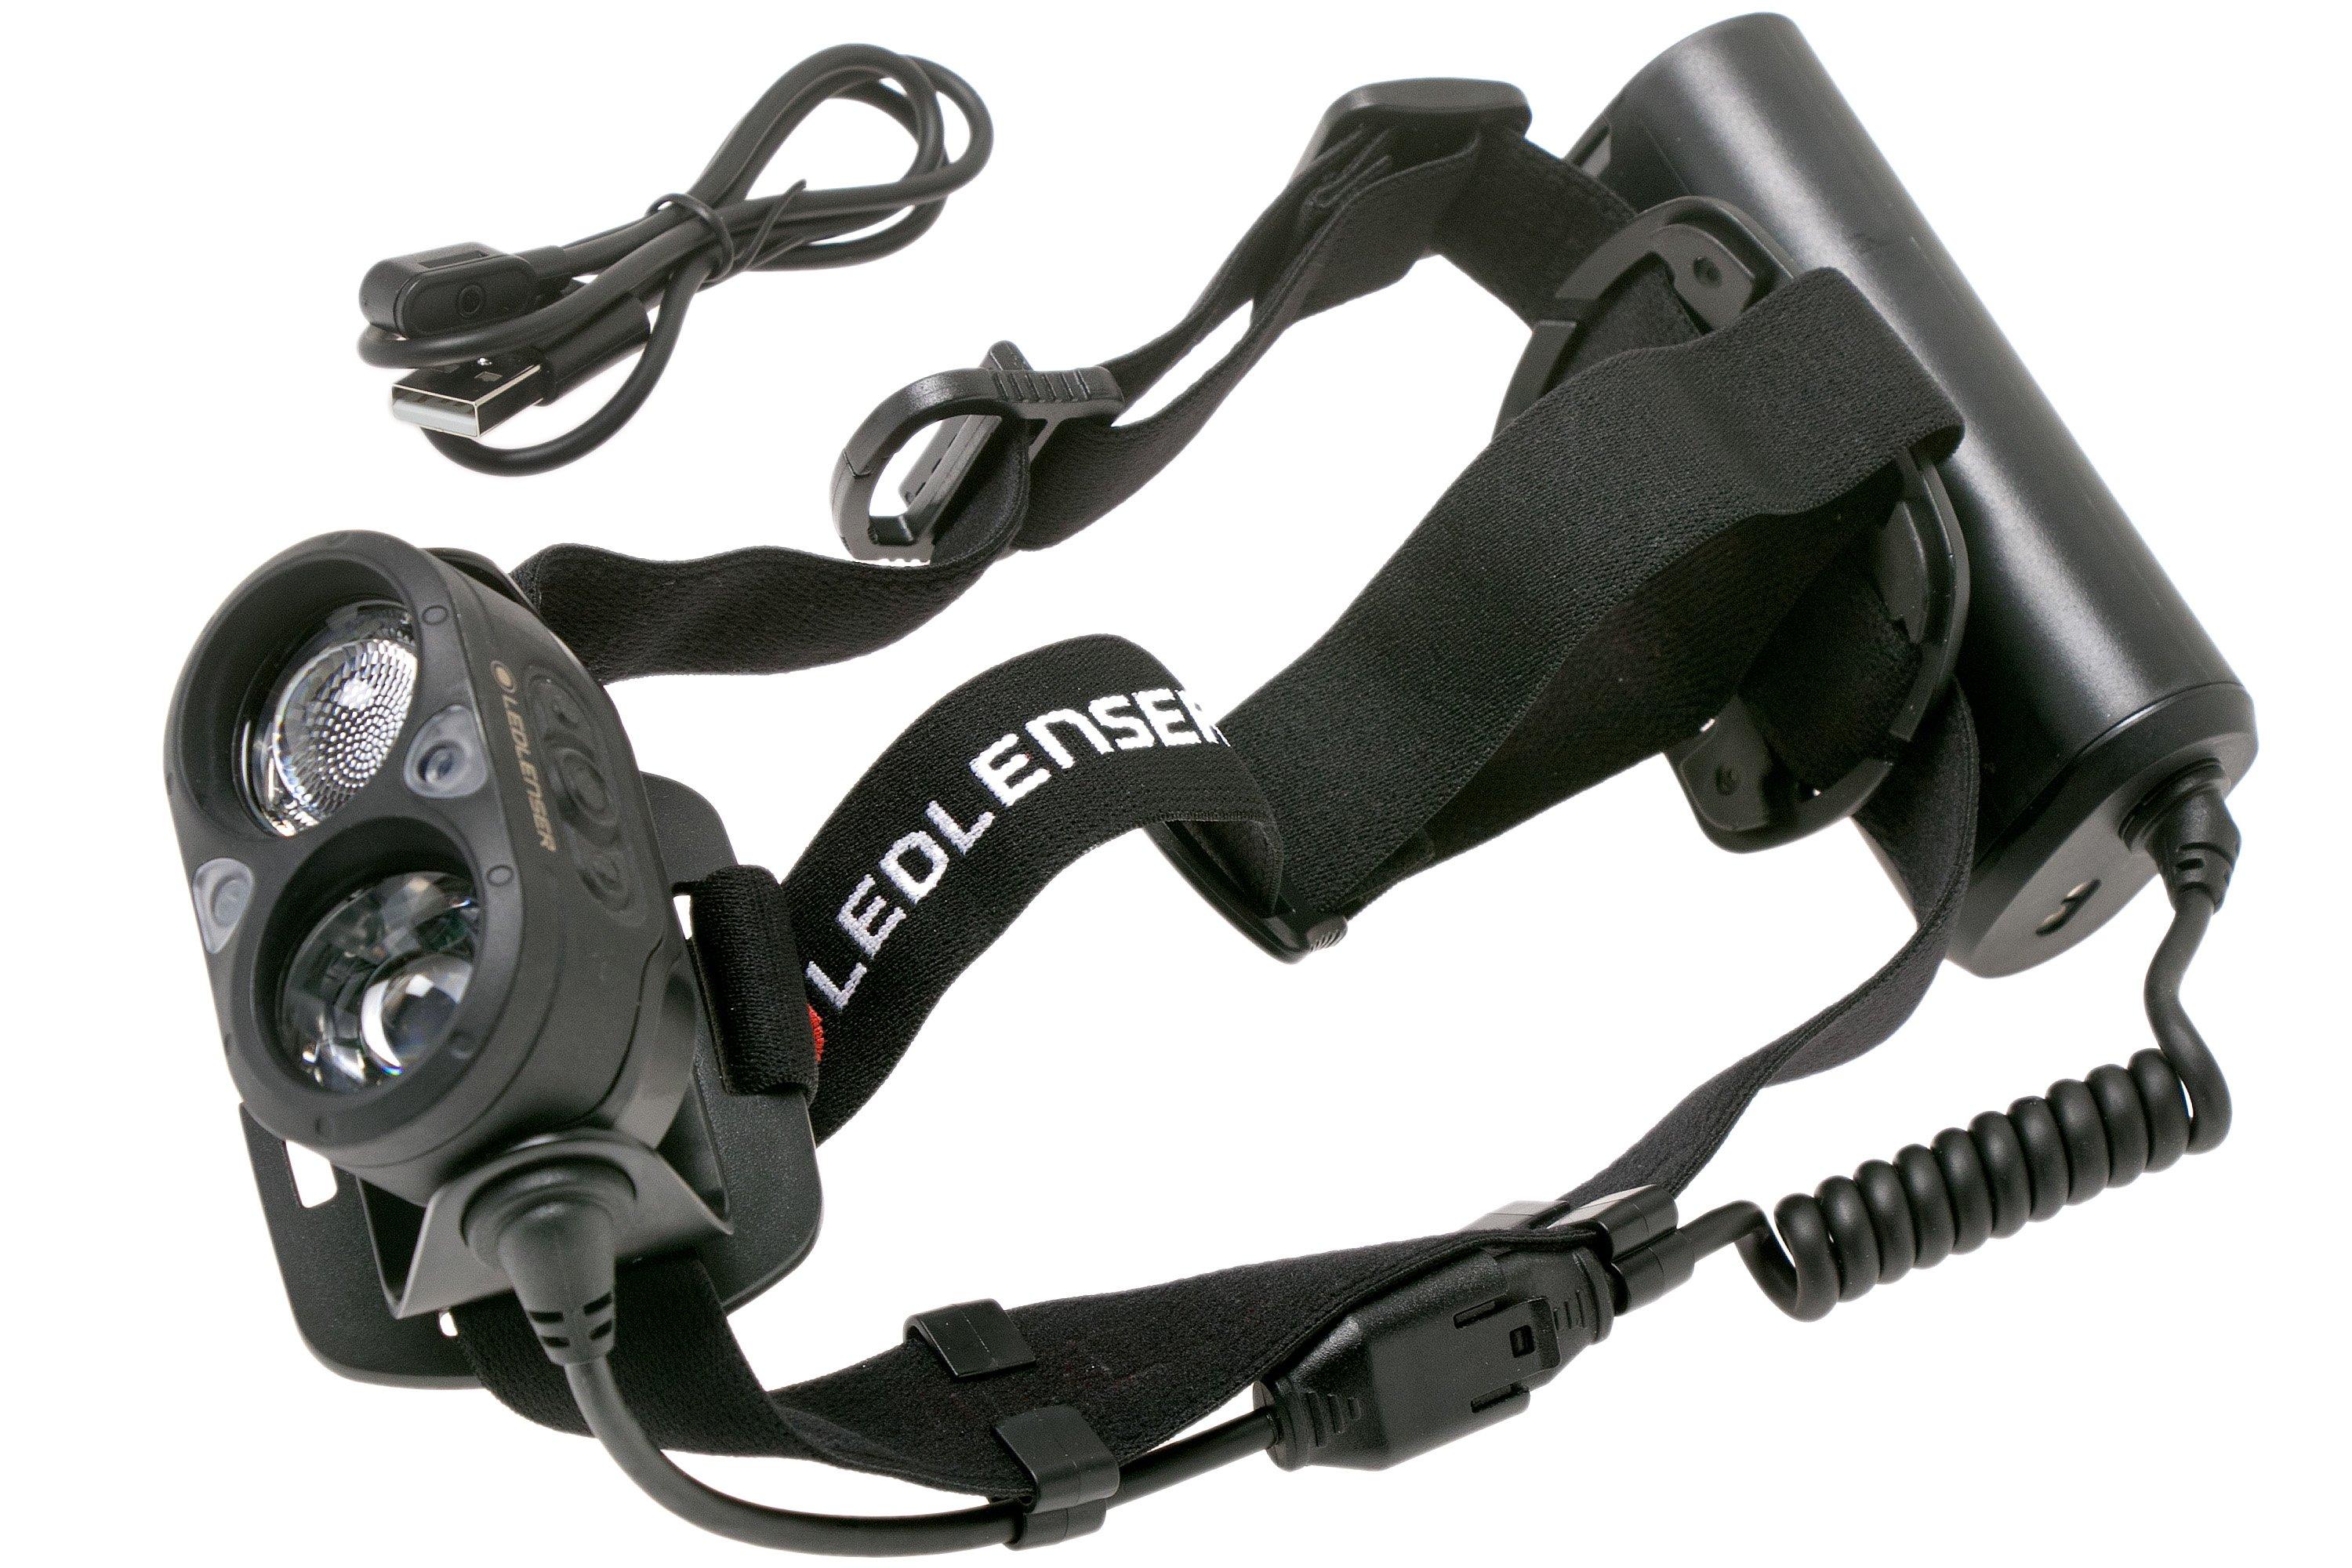 Ledlenser H19R Core rechargeable head torch Advantageously shopping at 